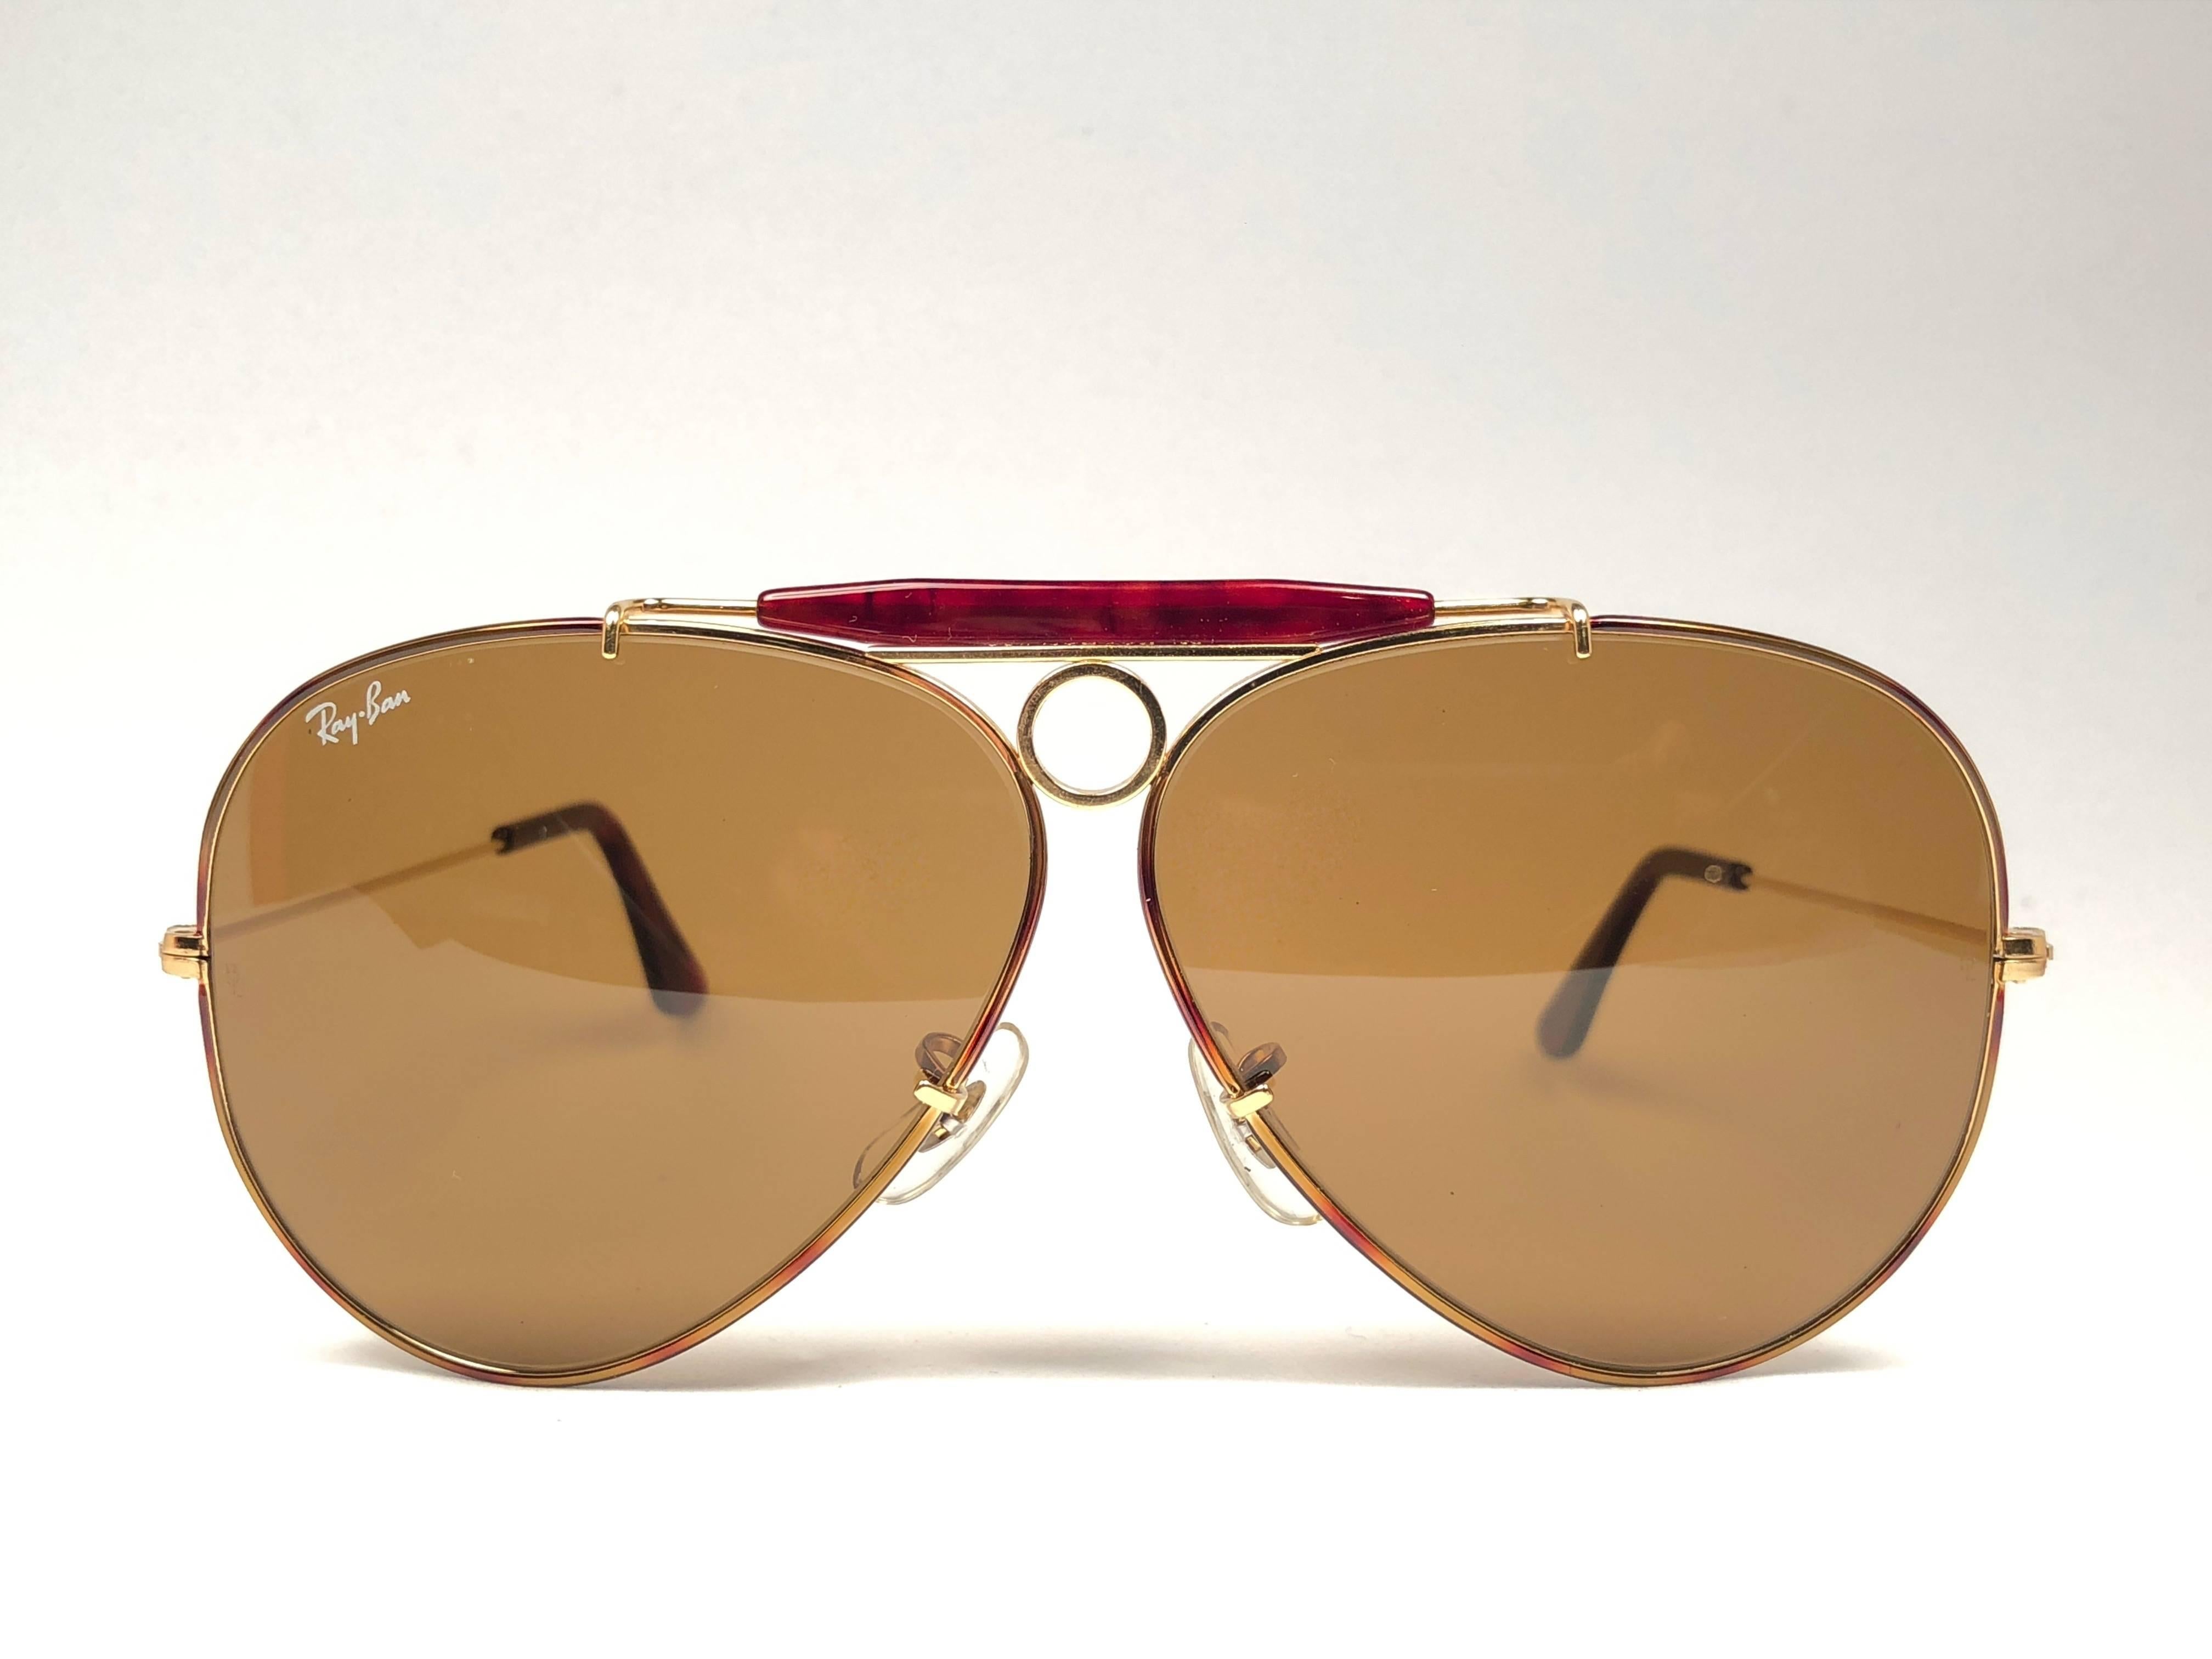 New Vintage Ray Ban Shooter Tortuga coating in 62mm. B&L etched in both B15 lenses.  The time of lenses block 85% of the sunlight.
Comes with its original Ray Ban B&L case. This pair may show minor sign of wear due to nearly 40 years of storage.
A